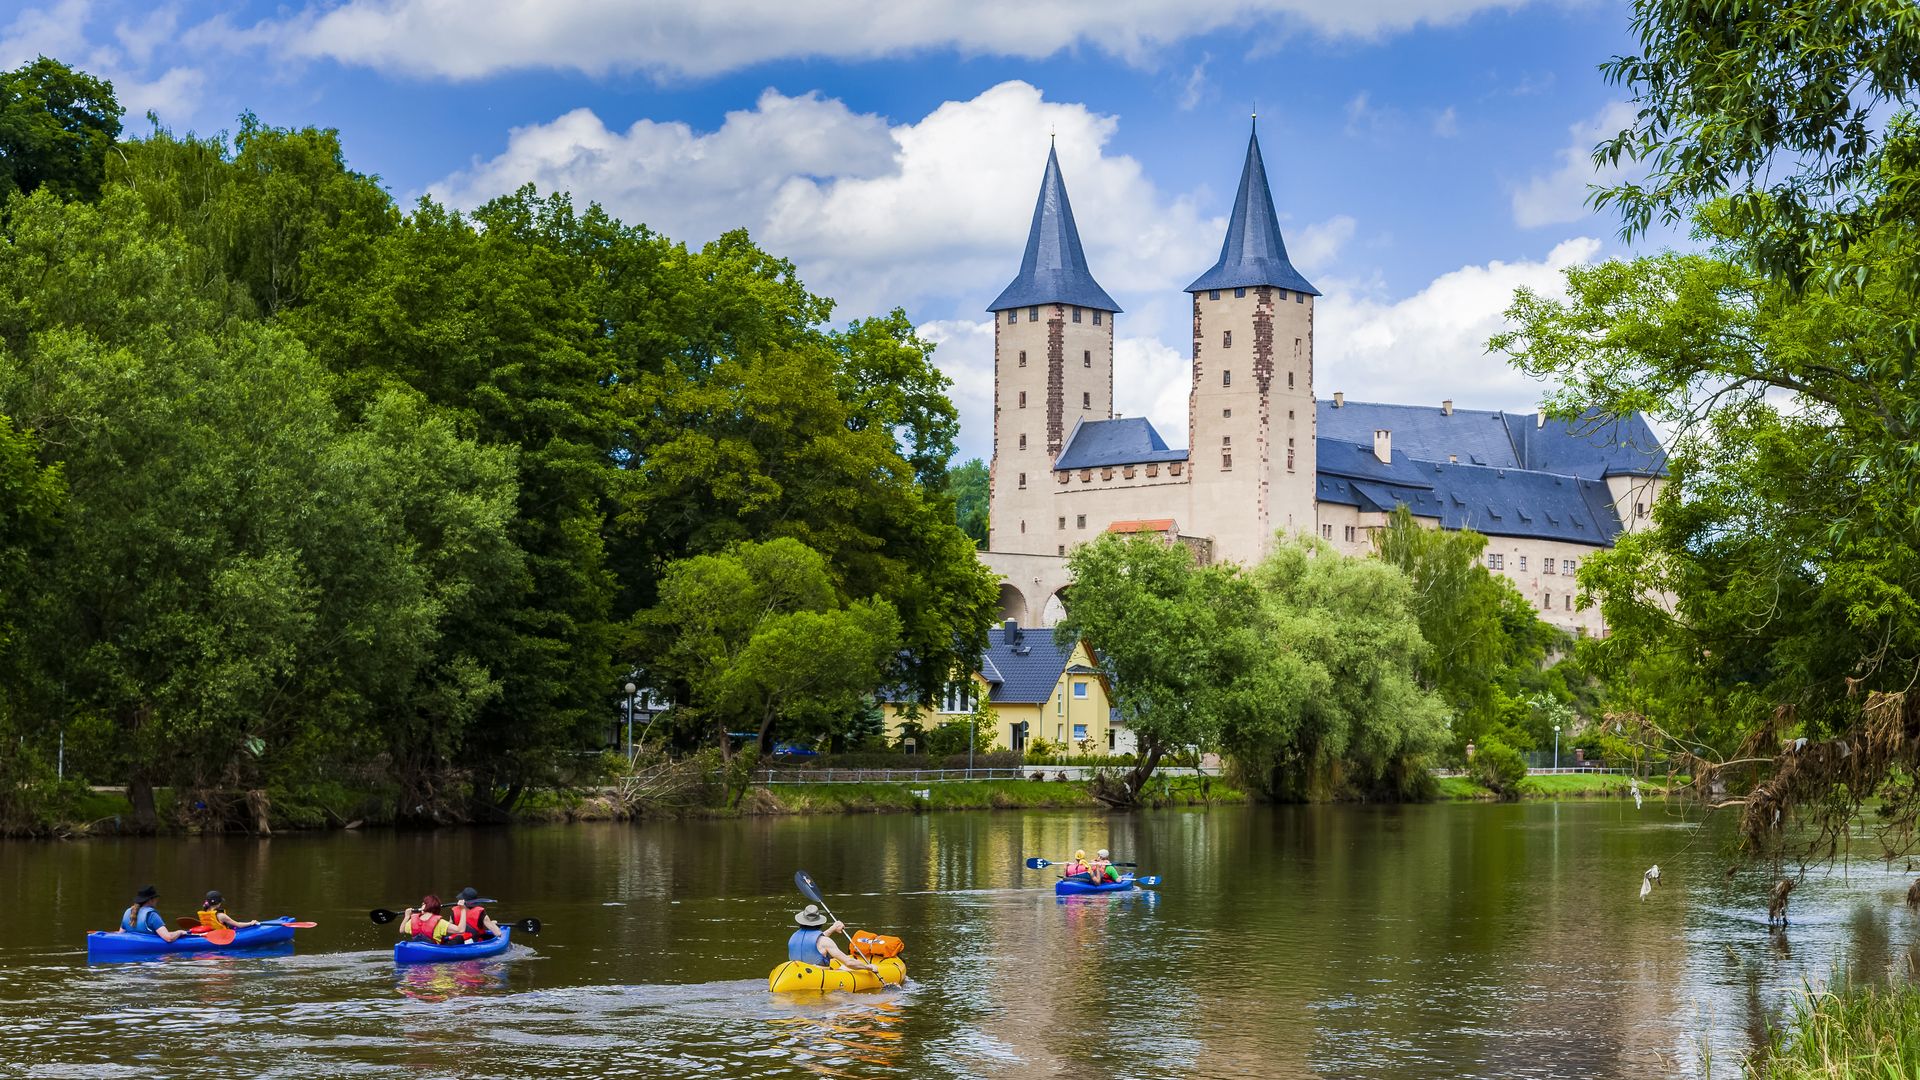 Water tourers canoeing past Rochlitz Castle on the river Zwickau Mulde.